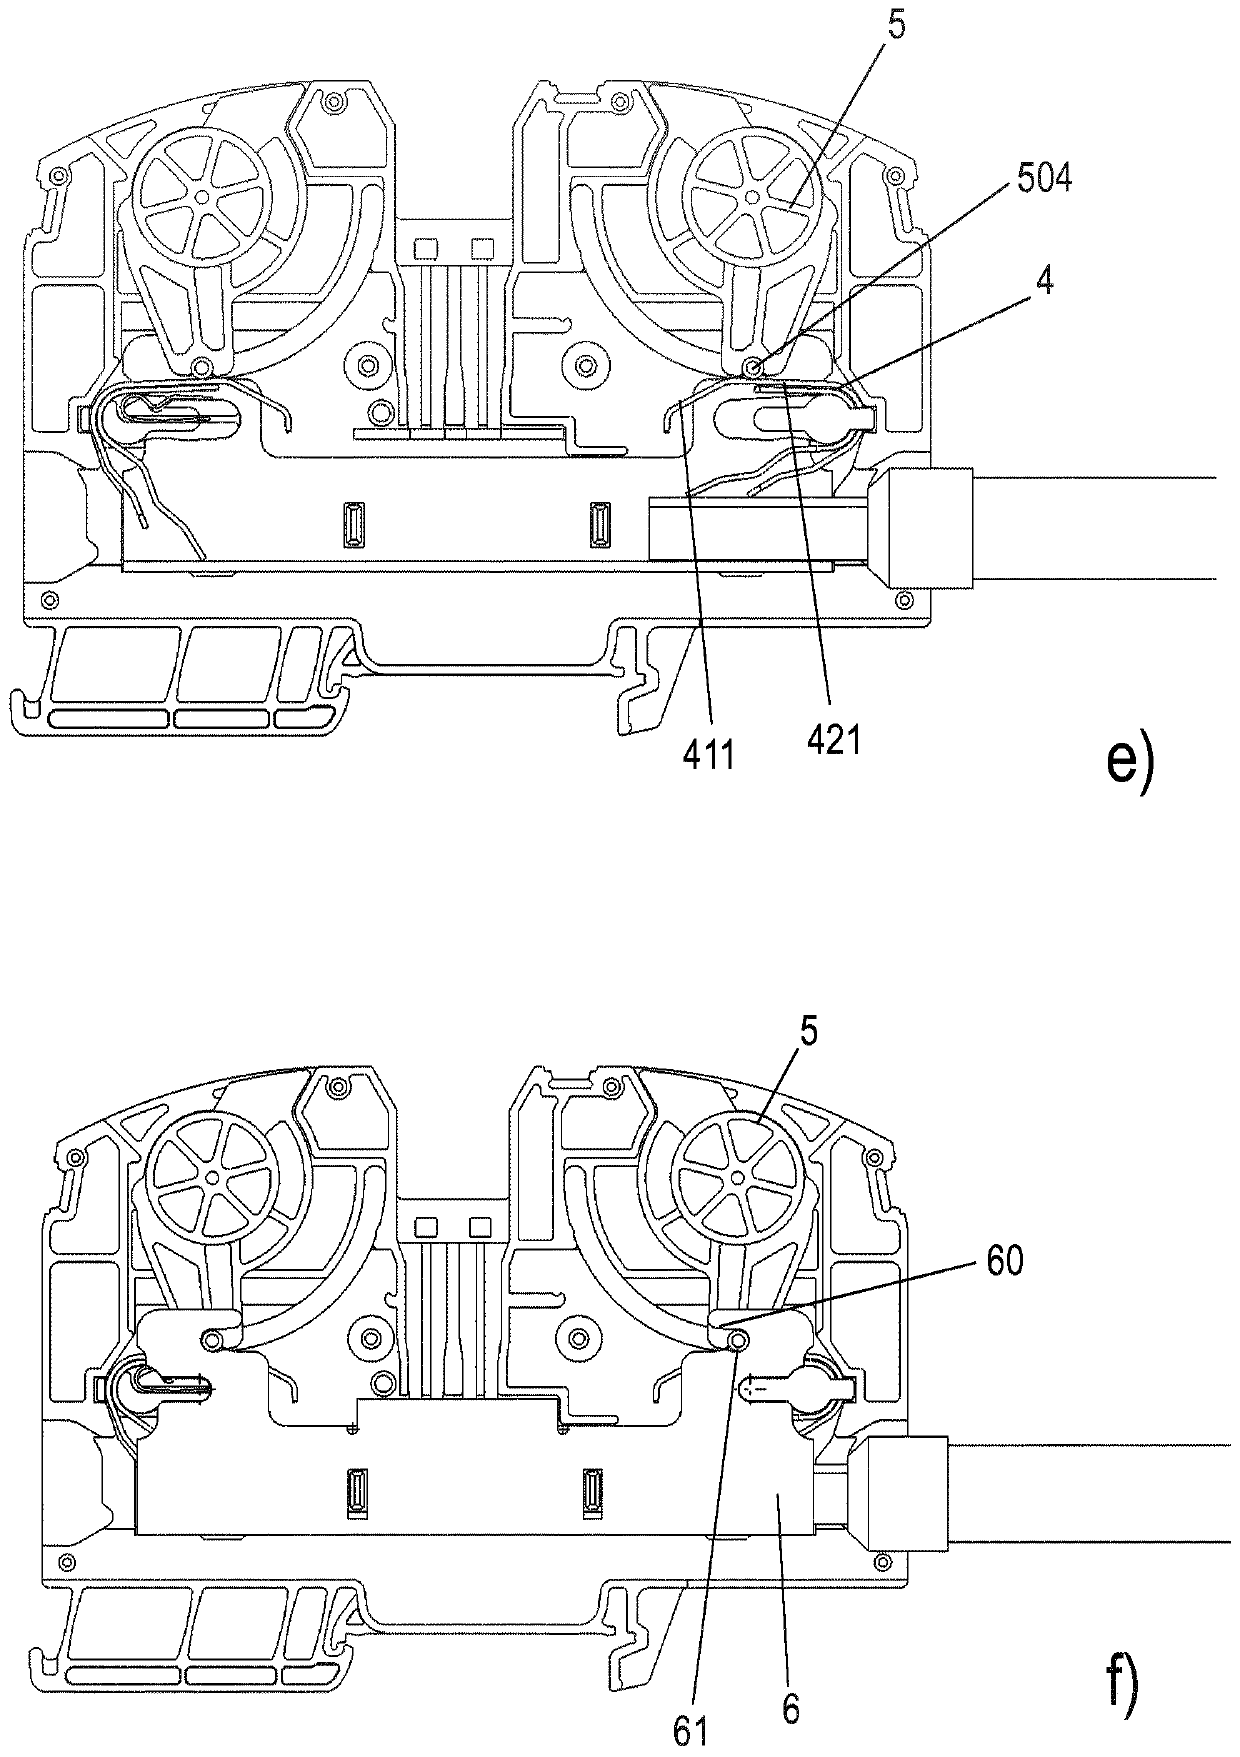 Connection device for connecting conductor end